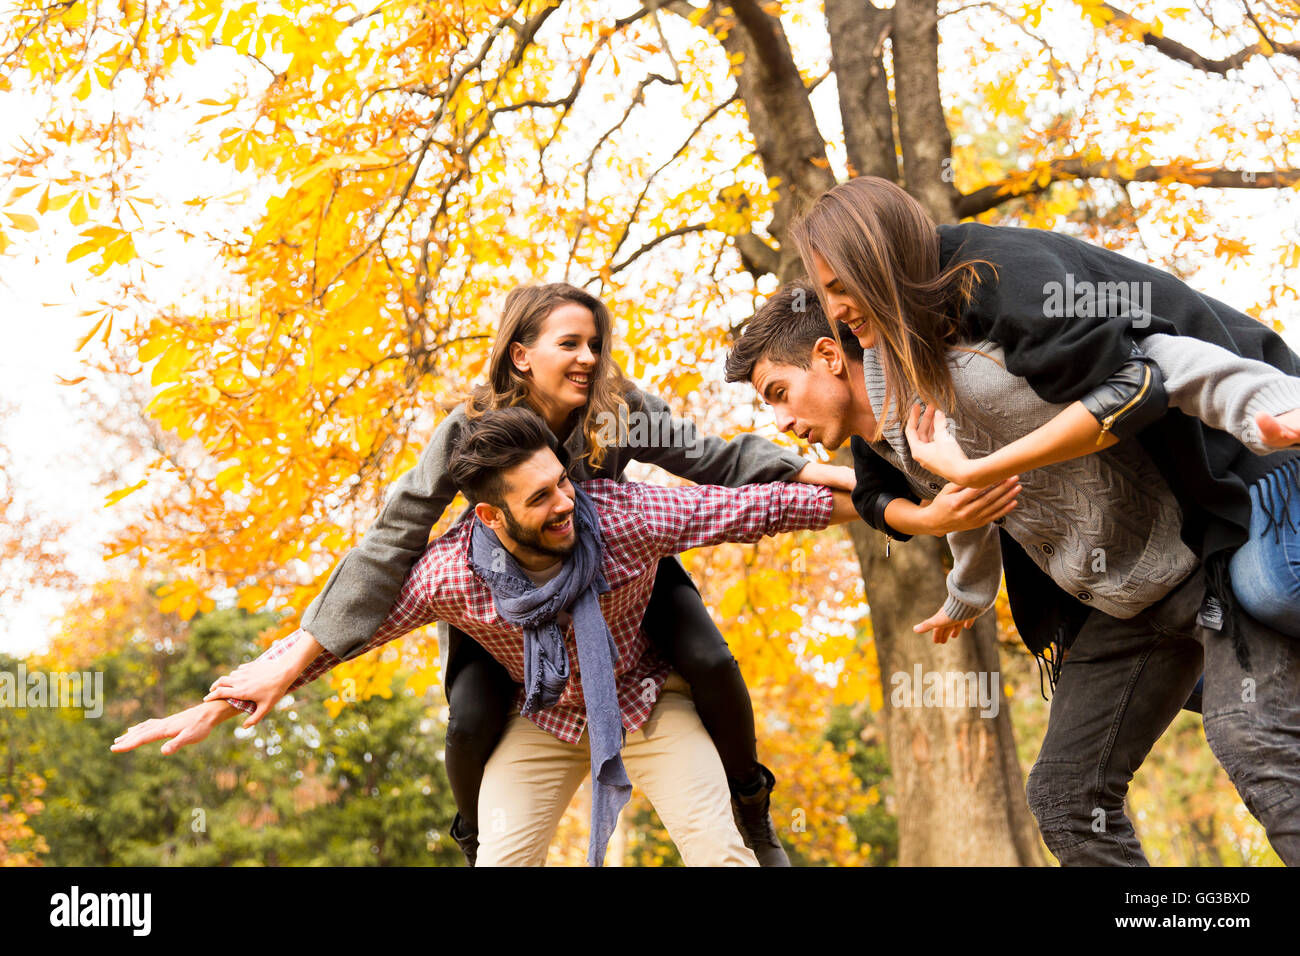 Young people having fun in the autumn park Stock Photo